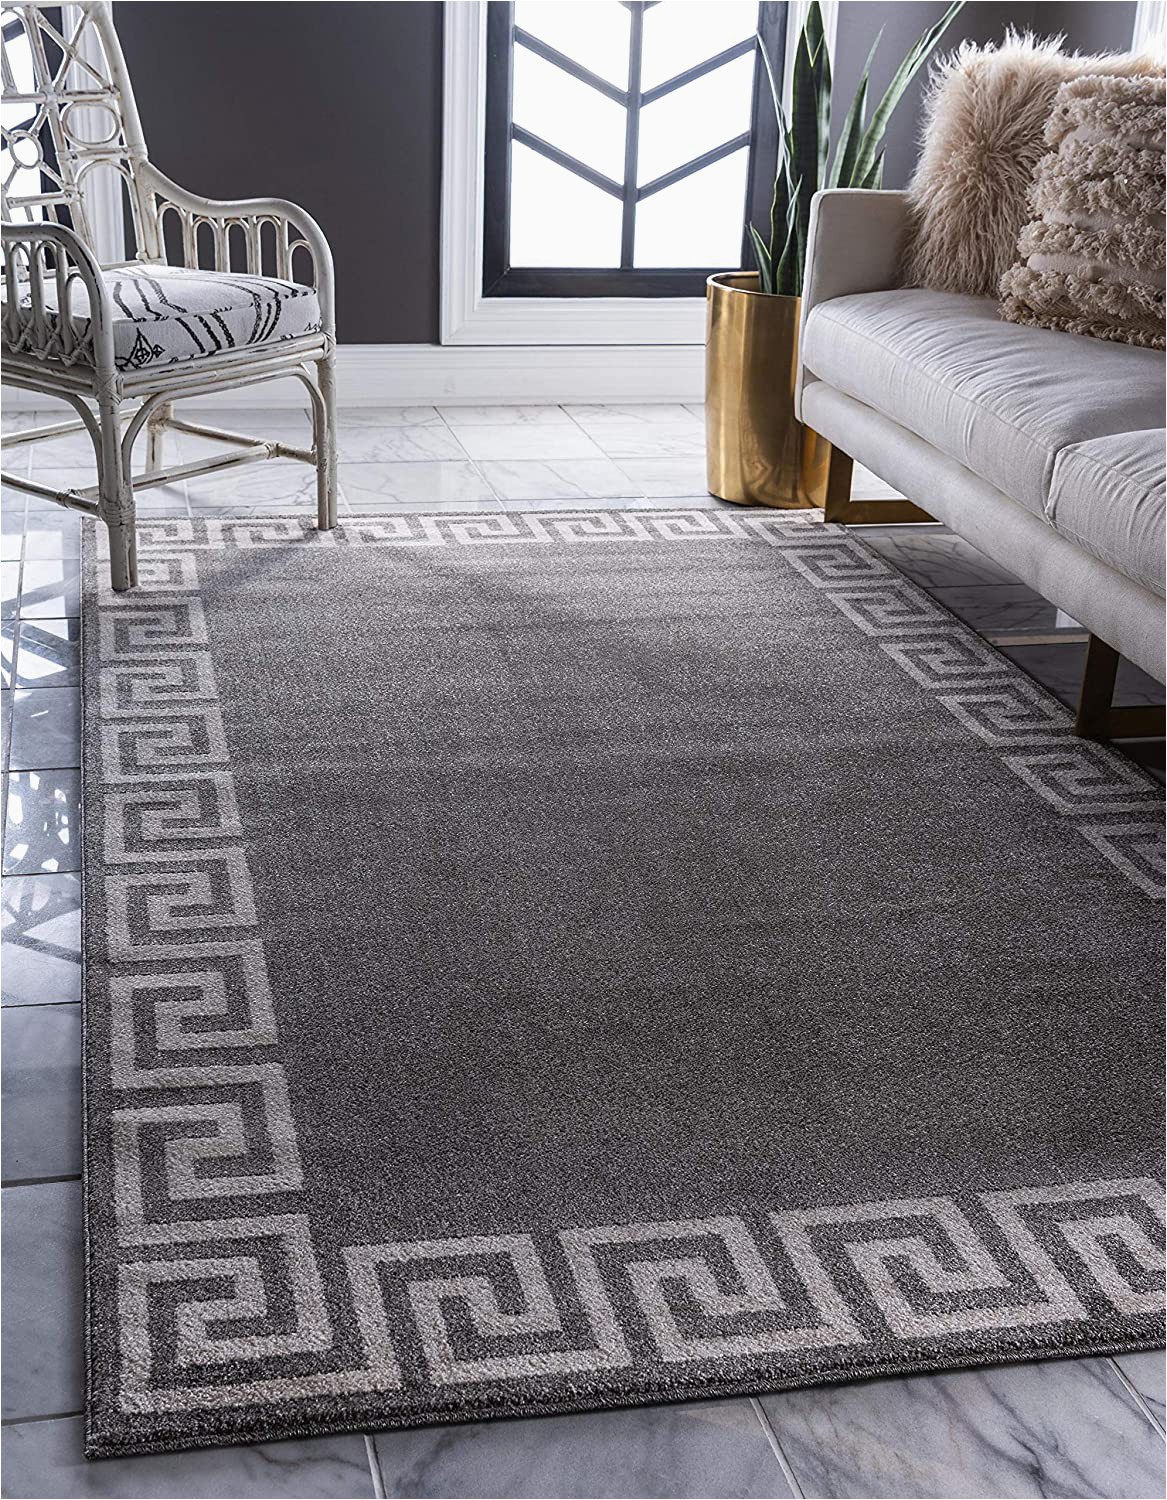 Cheap 7 X 10 area Rugs Unique Loom athens Geometric Casual area Rug 7 X 10 Rectangle Gray